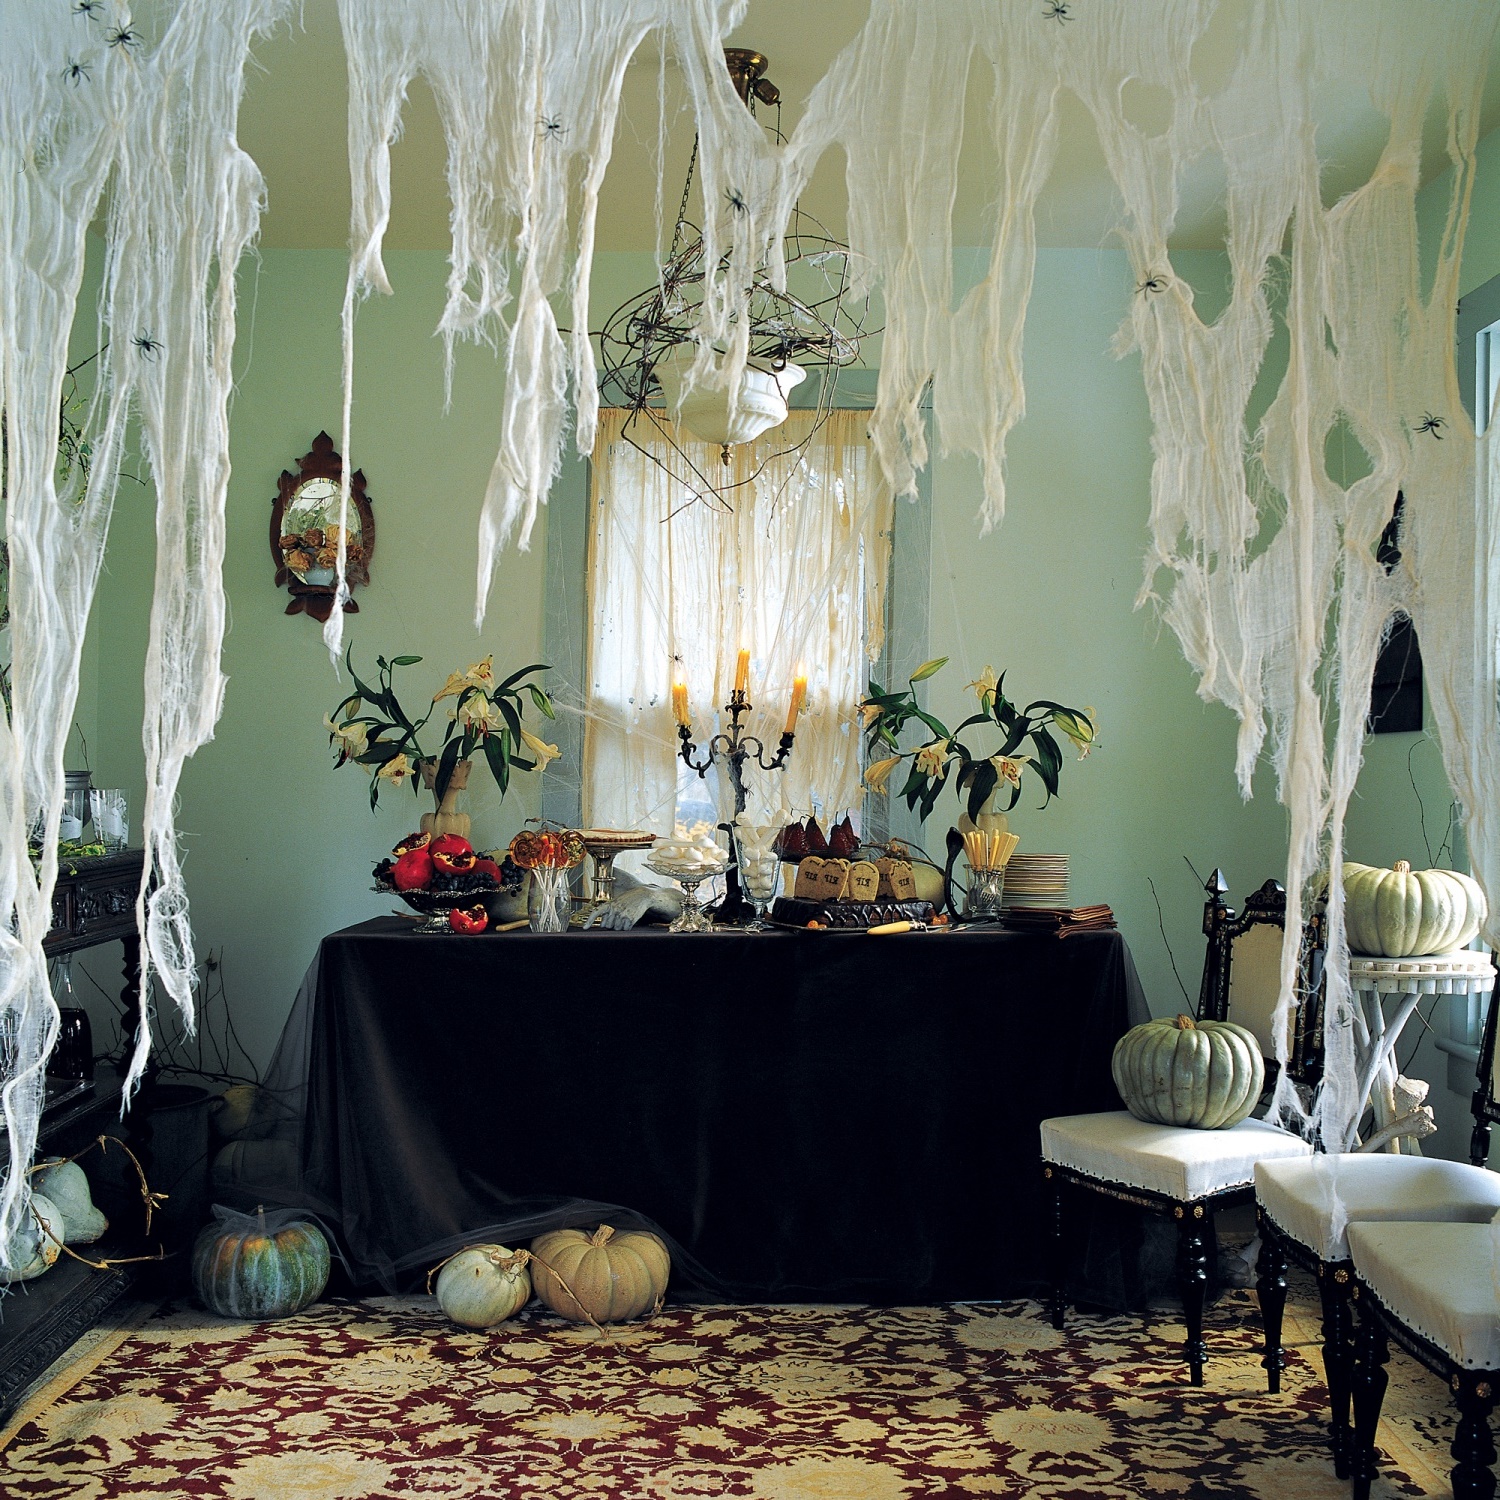 11 Awesome Halloween Indoor Decorations - Awesome 11